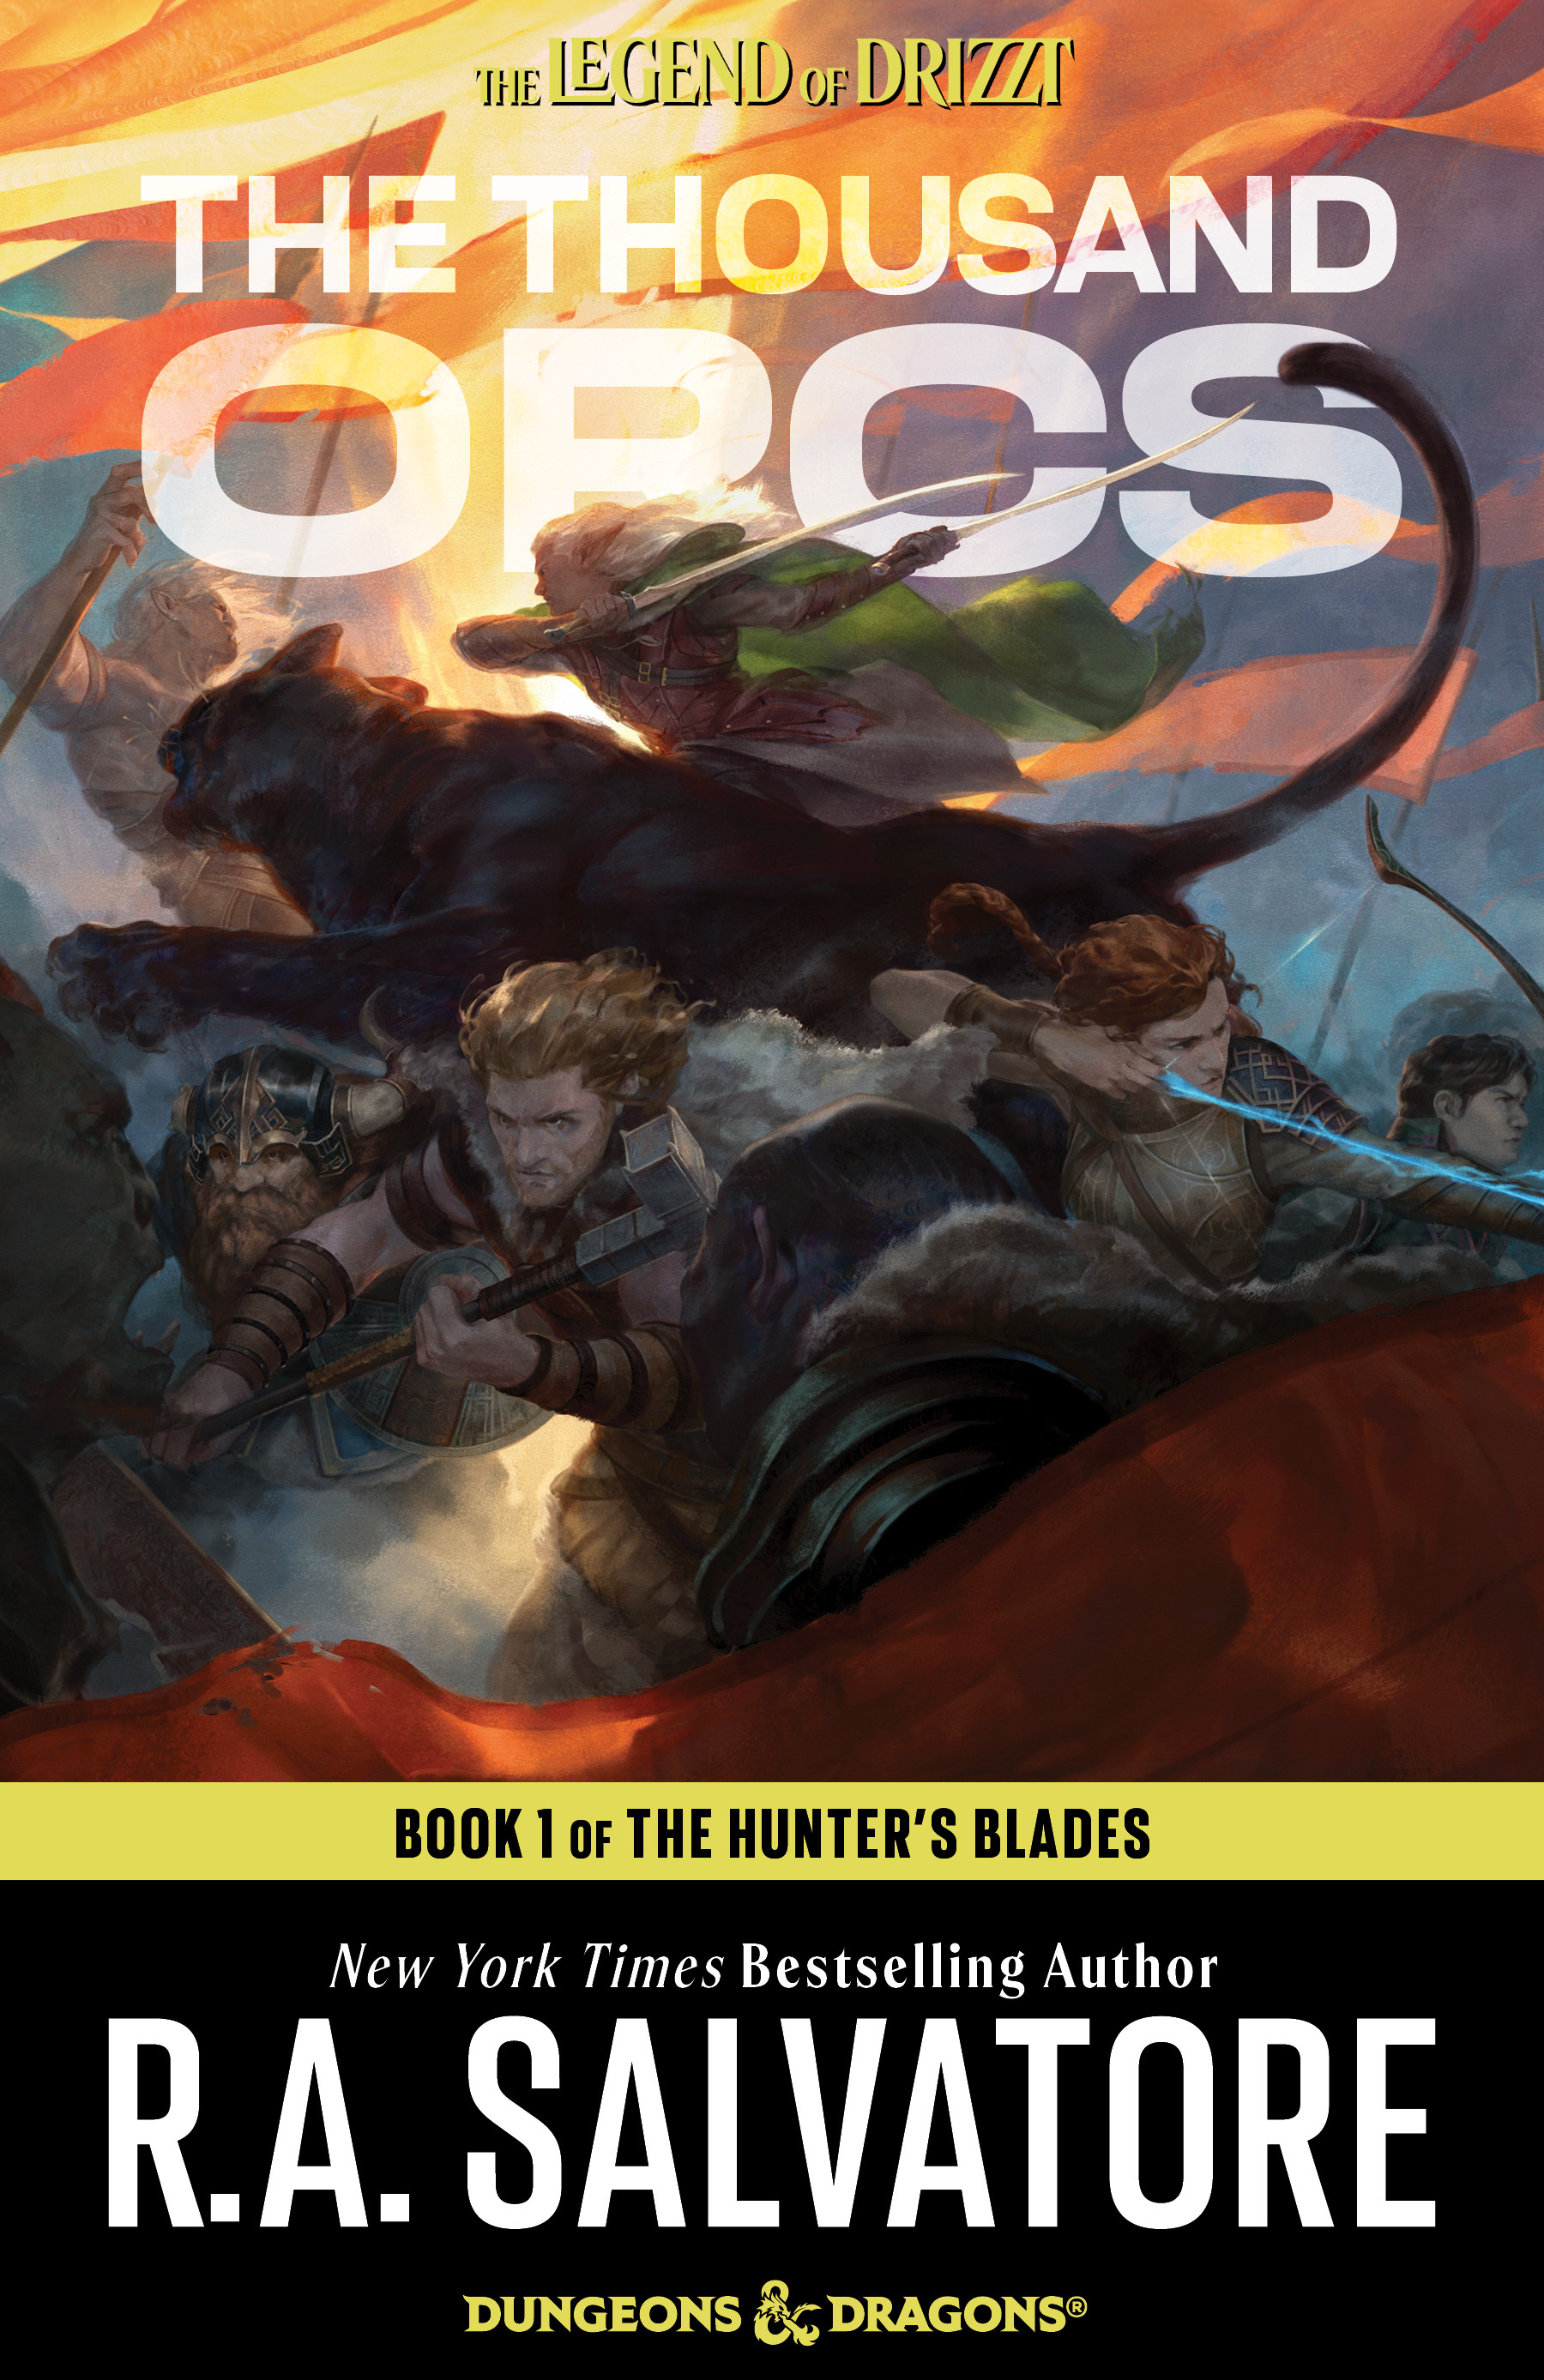 The Thousand Orcs: Hunter's Blades #1 (Legend of Drizzt #17) R. A. Salvatore Author